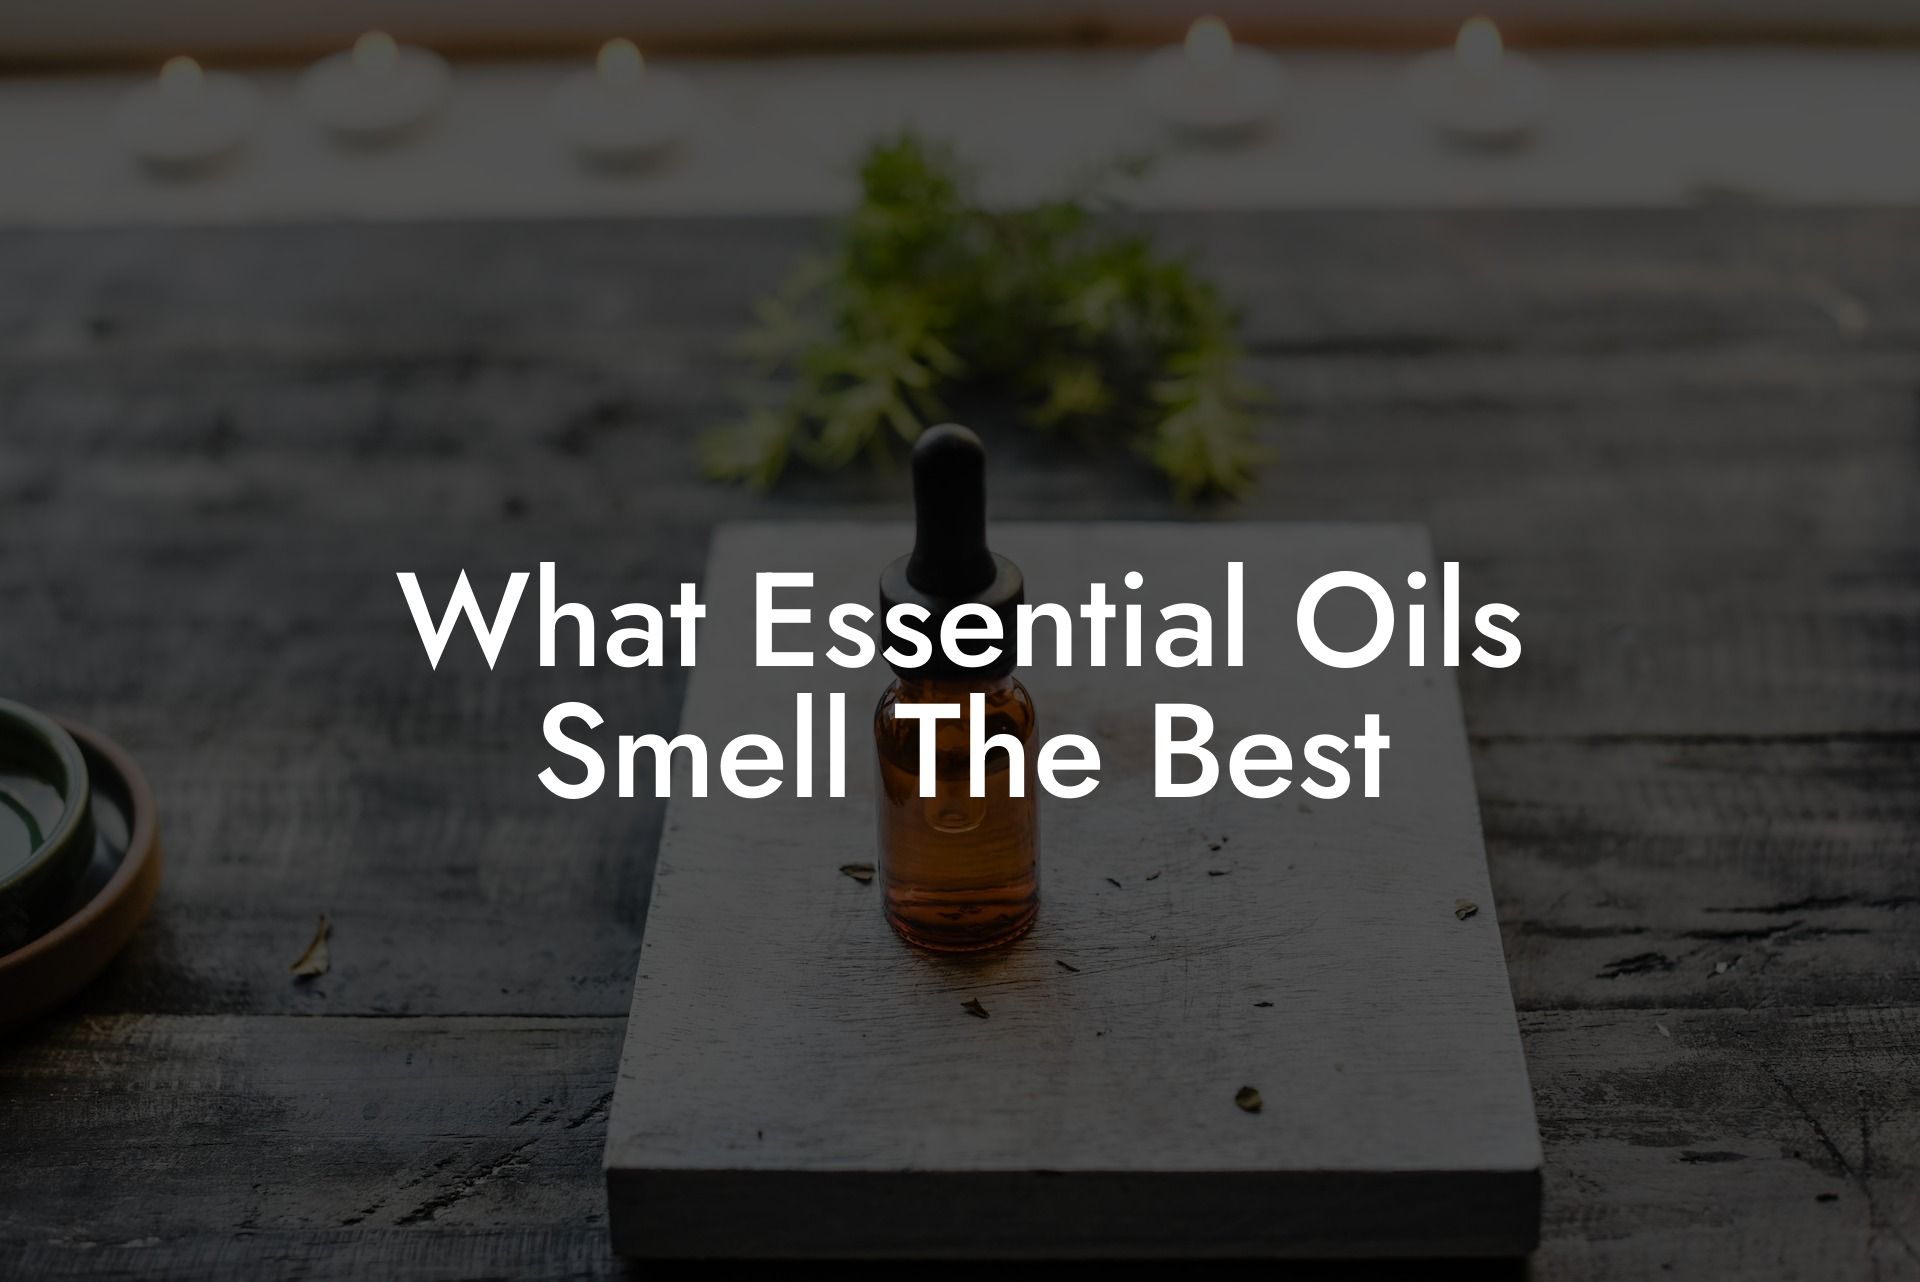 What Essential Oils Smell The Best